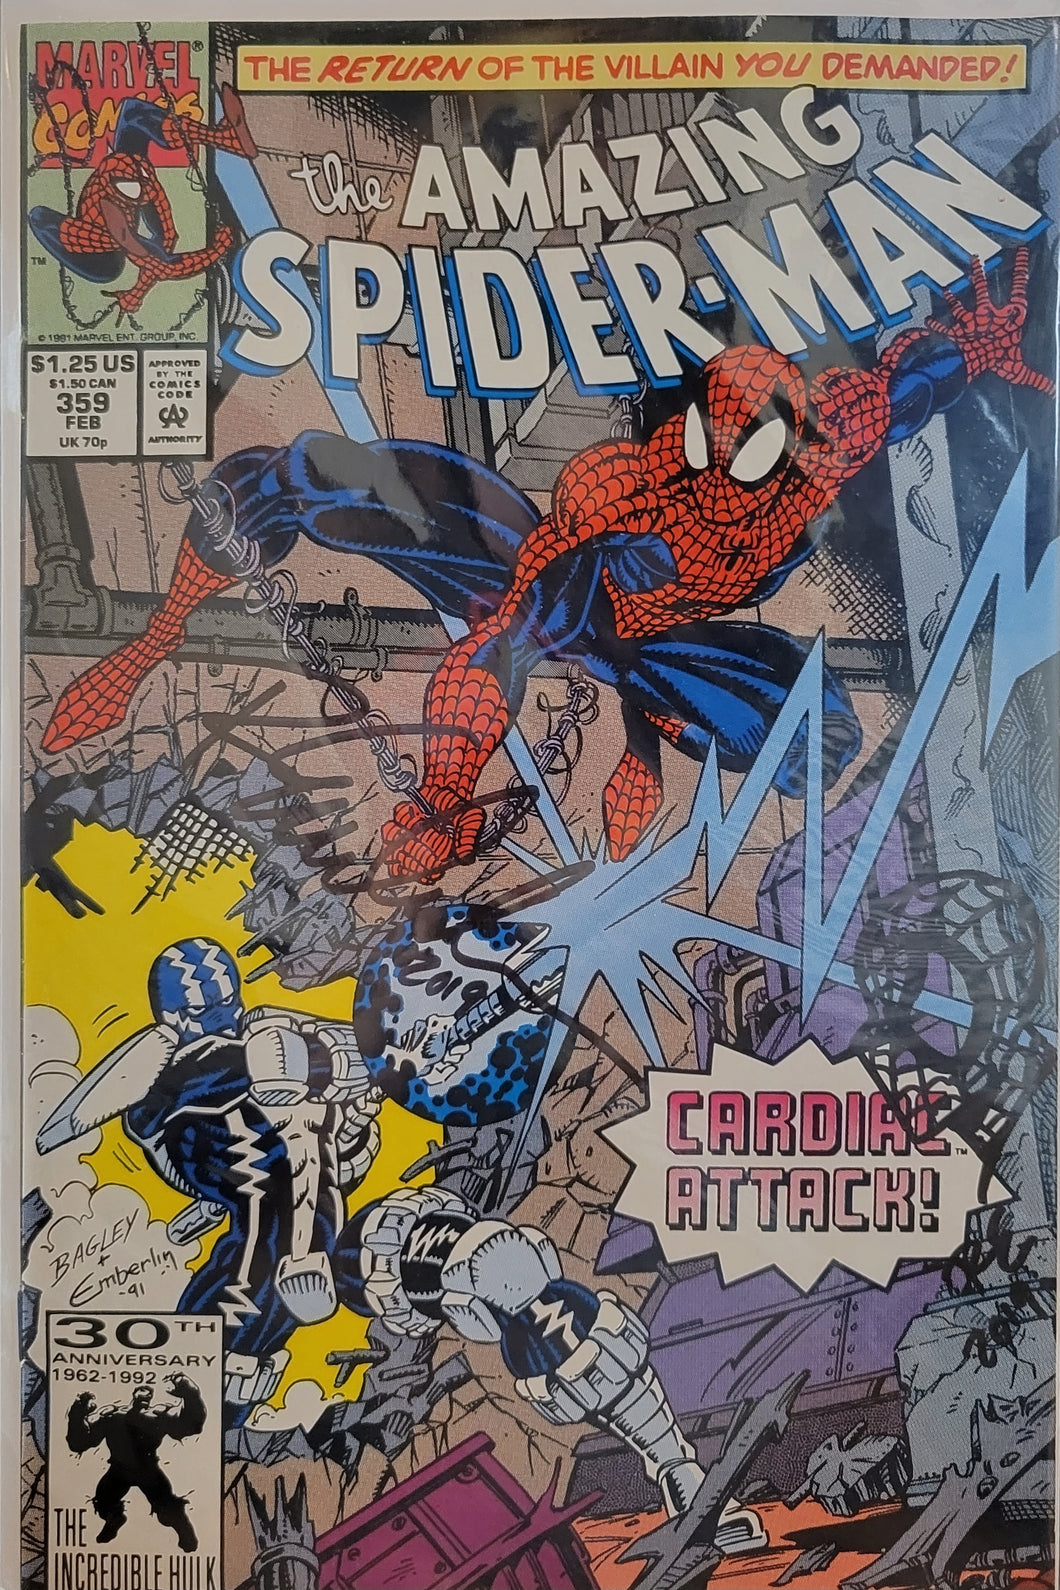 Amazing Spider-Man #359 -1st Brief Carnage Cameo- Signed & Remarqued by Randy Emberlin w/COA